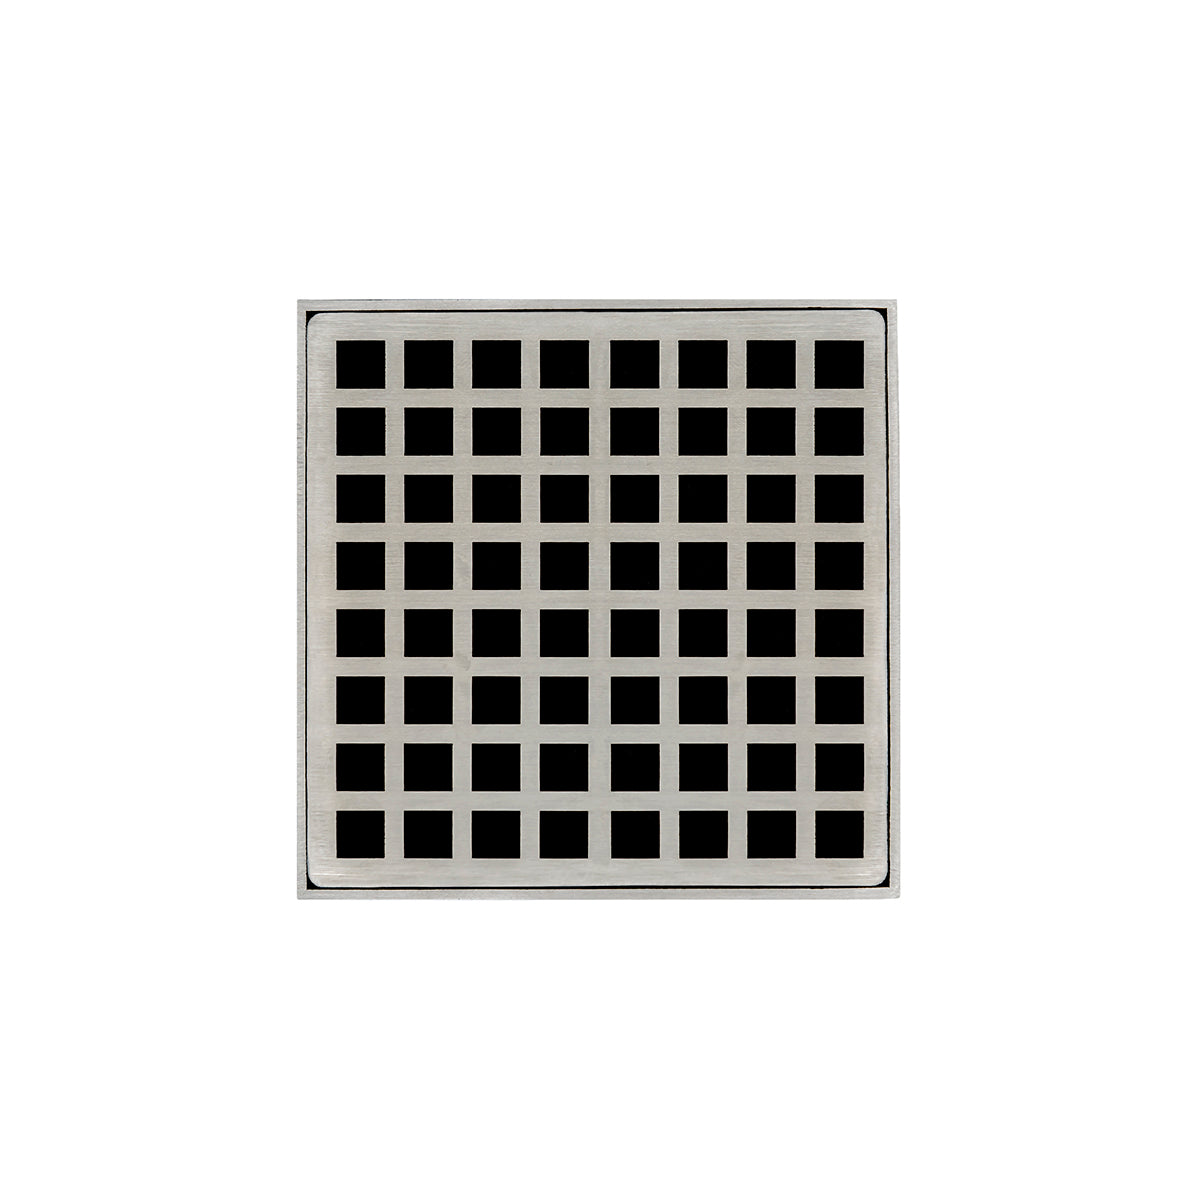 Infinity Drain 5" x 5" QD 5 Premium Center Drain Kit with Squares Pattern Decorative Plate with Cast Iron Drain Body, 2" Outlet